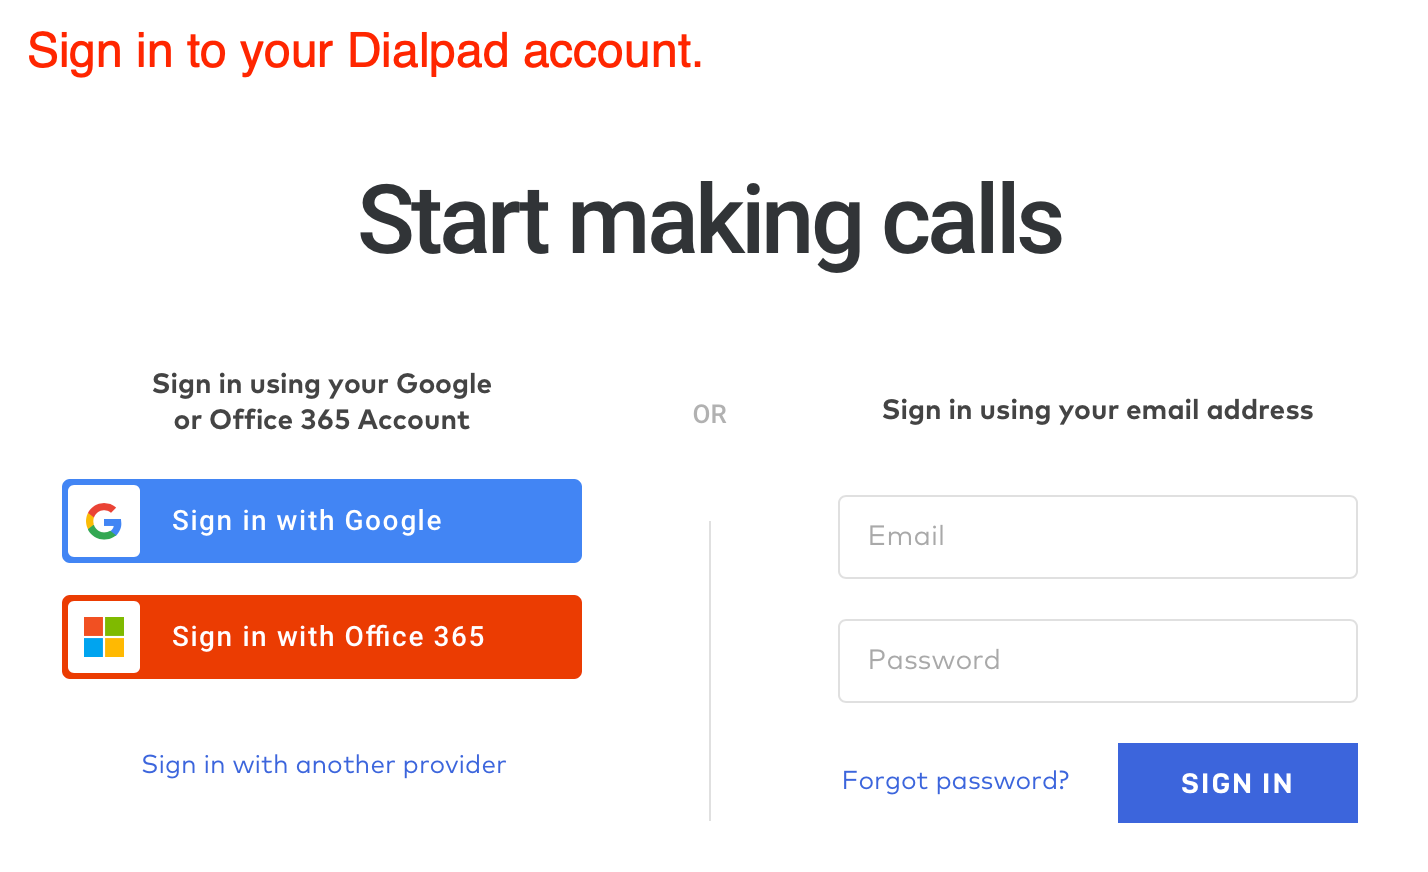 Sign in to Dialpad.